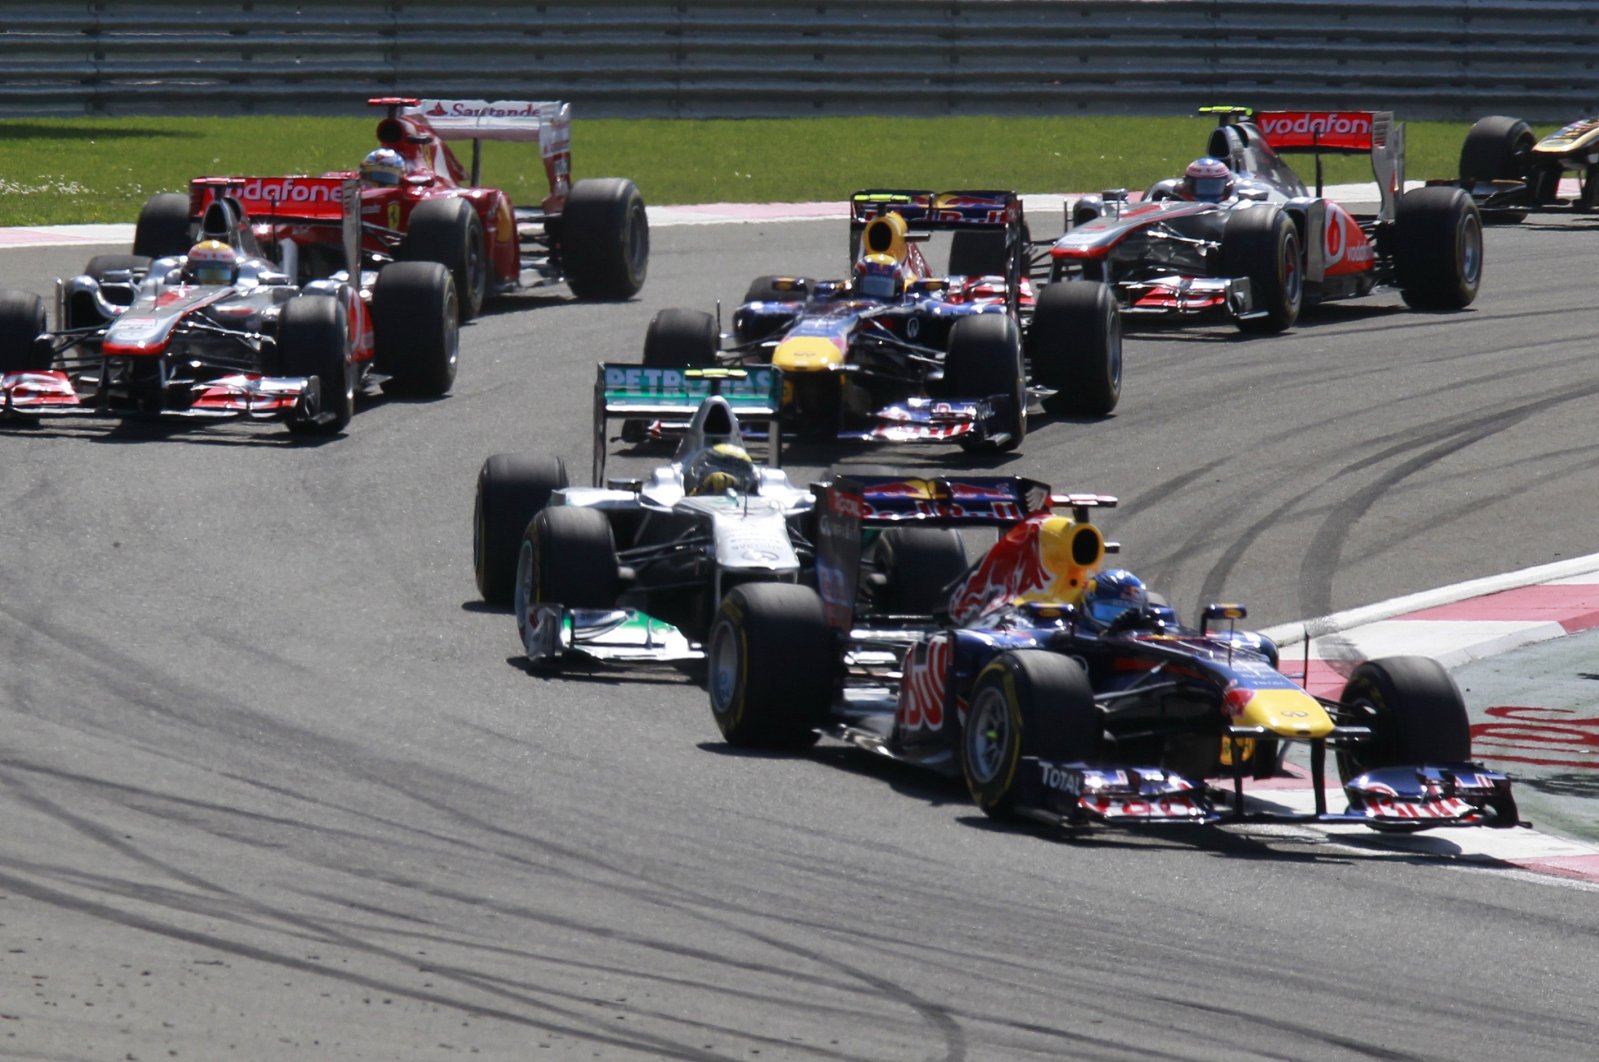 Red Bull driver Sebastian Vettel (R) leads into a turn during the Formula One Turkish Grand Prix at the Istanbul Park circuit in Istanbul, Turkey, May 8, 2011. (Reuters Photo)